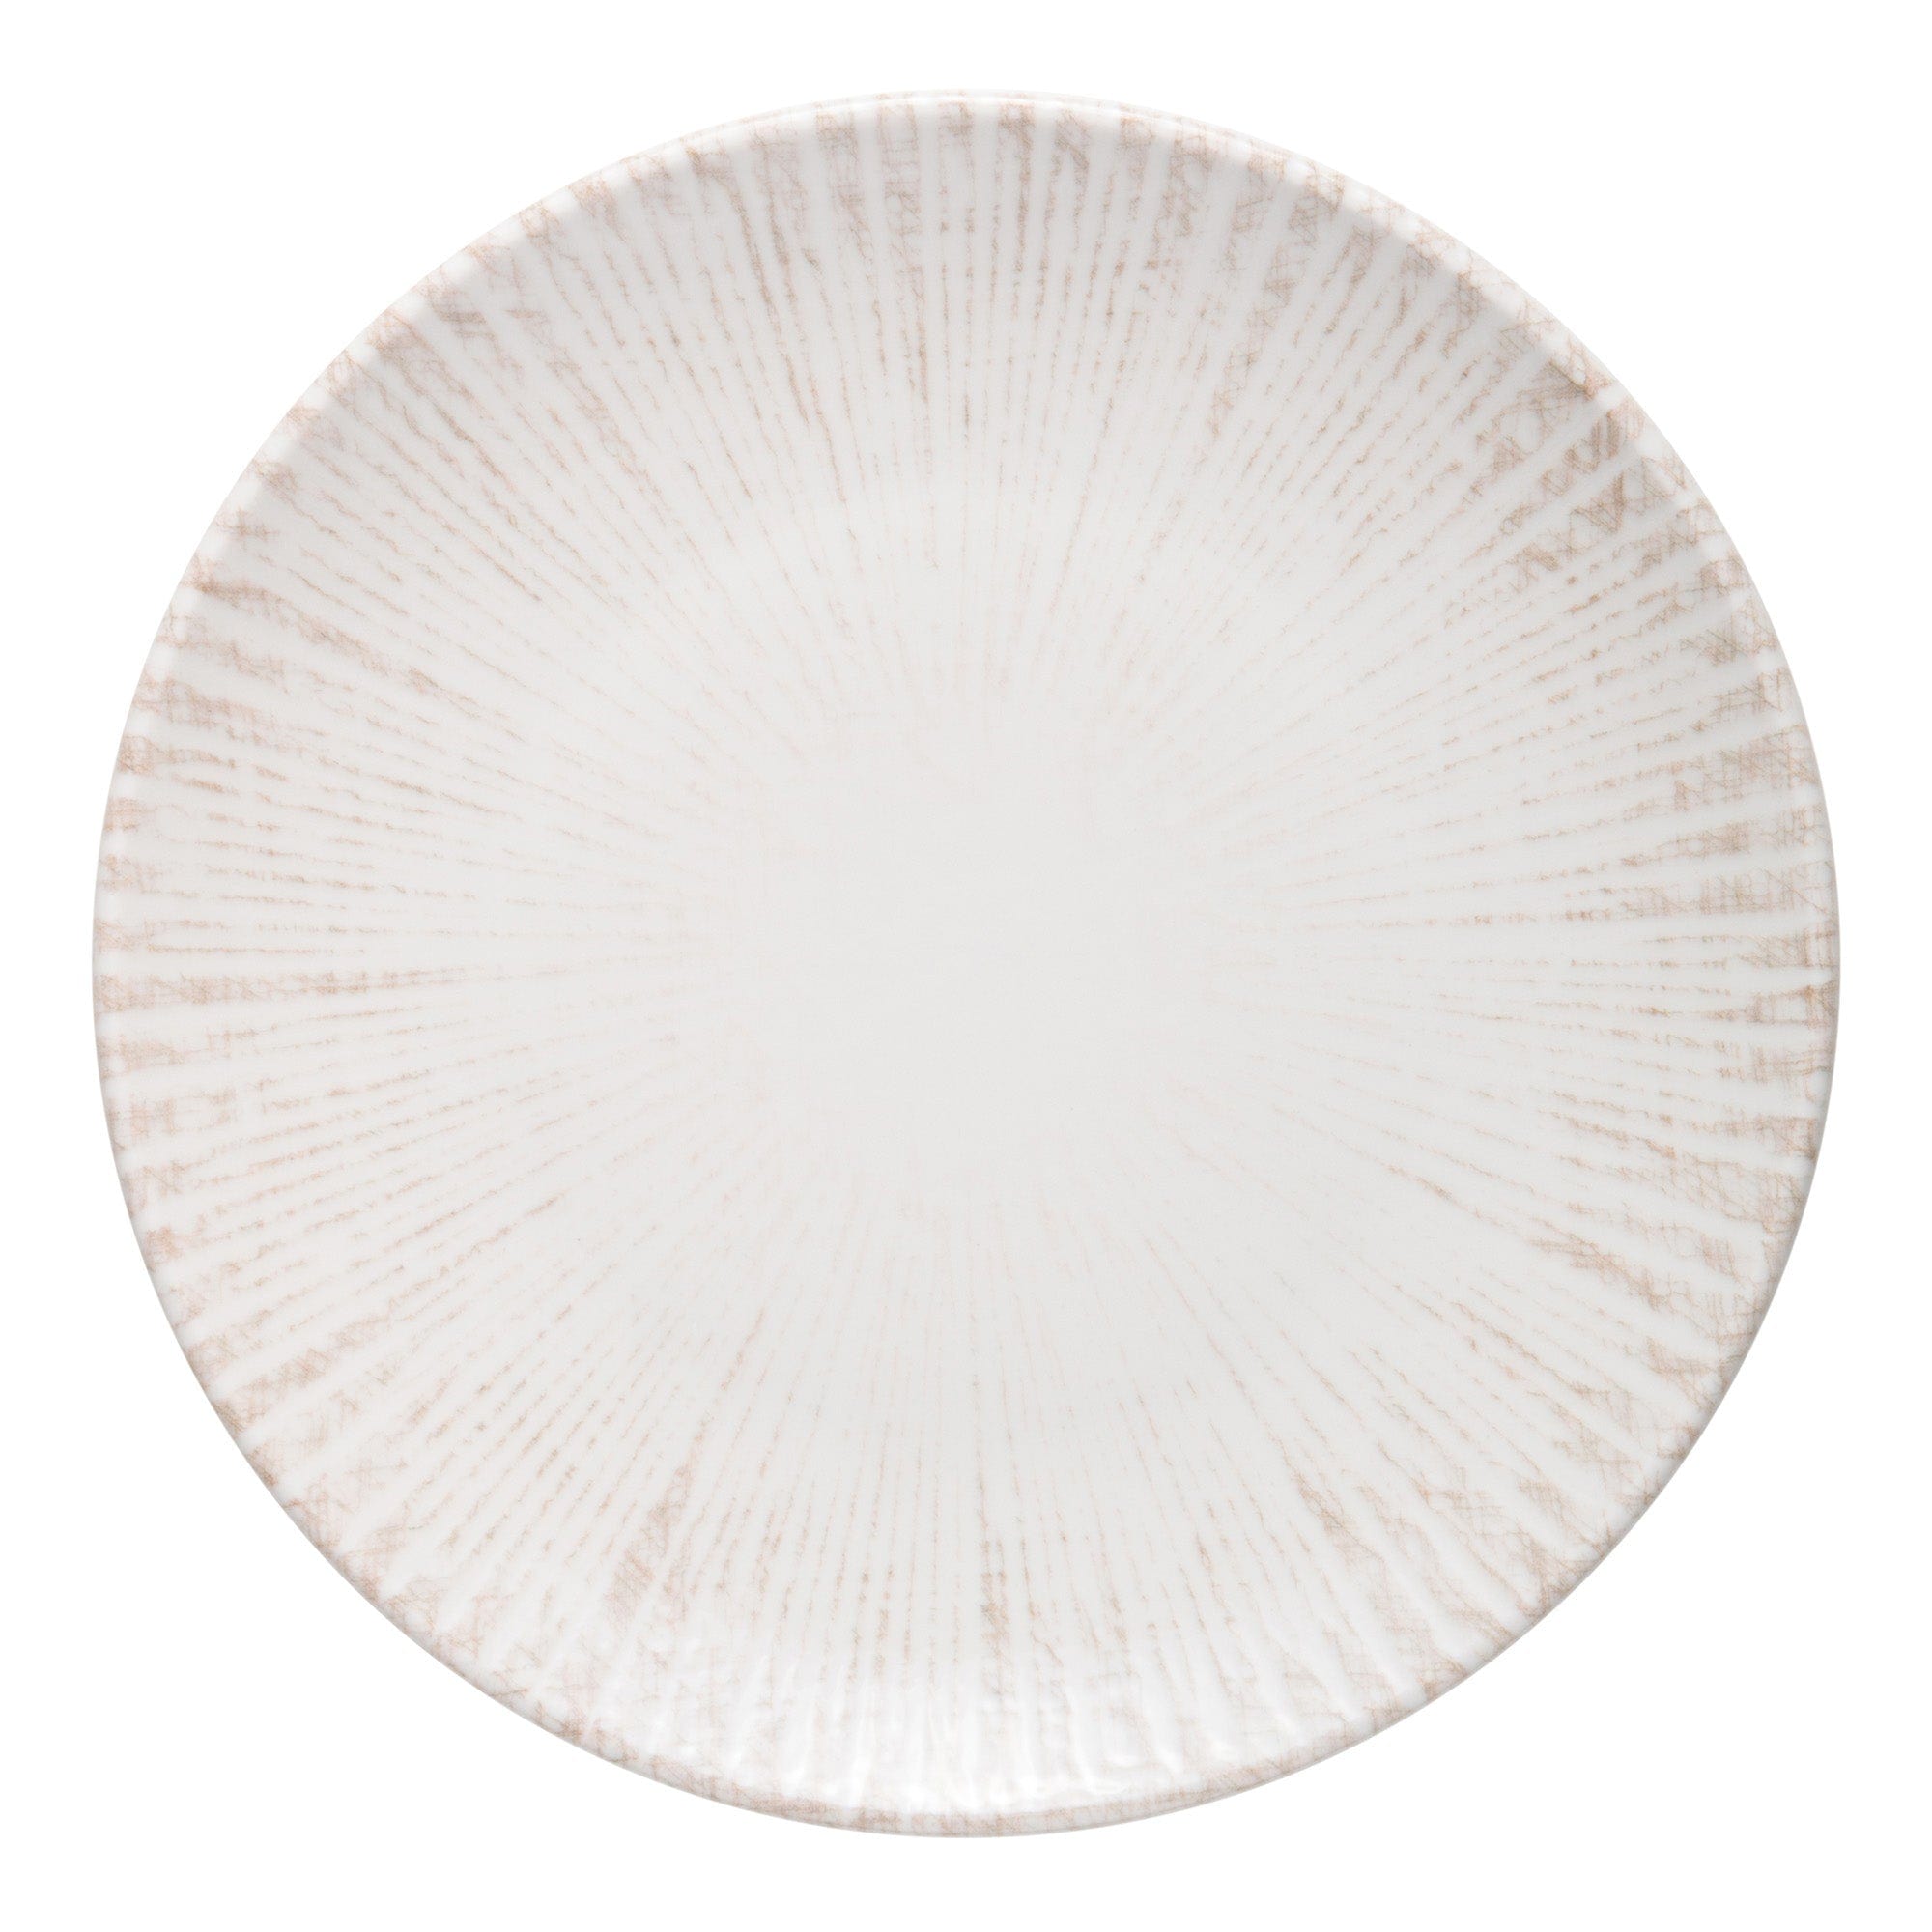 Ray Porcelain Plate 6.0"